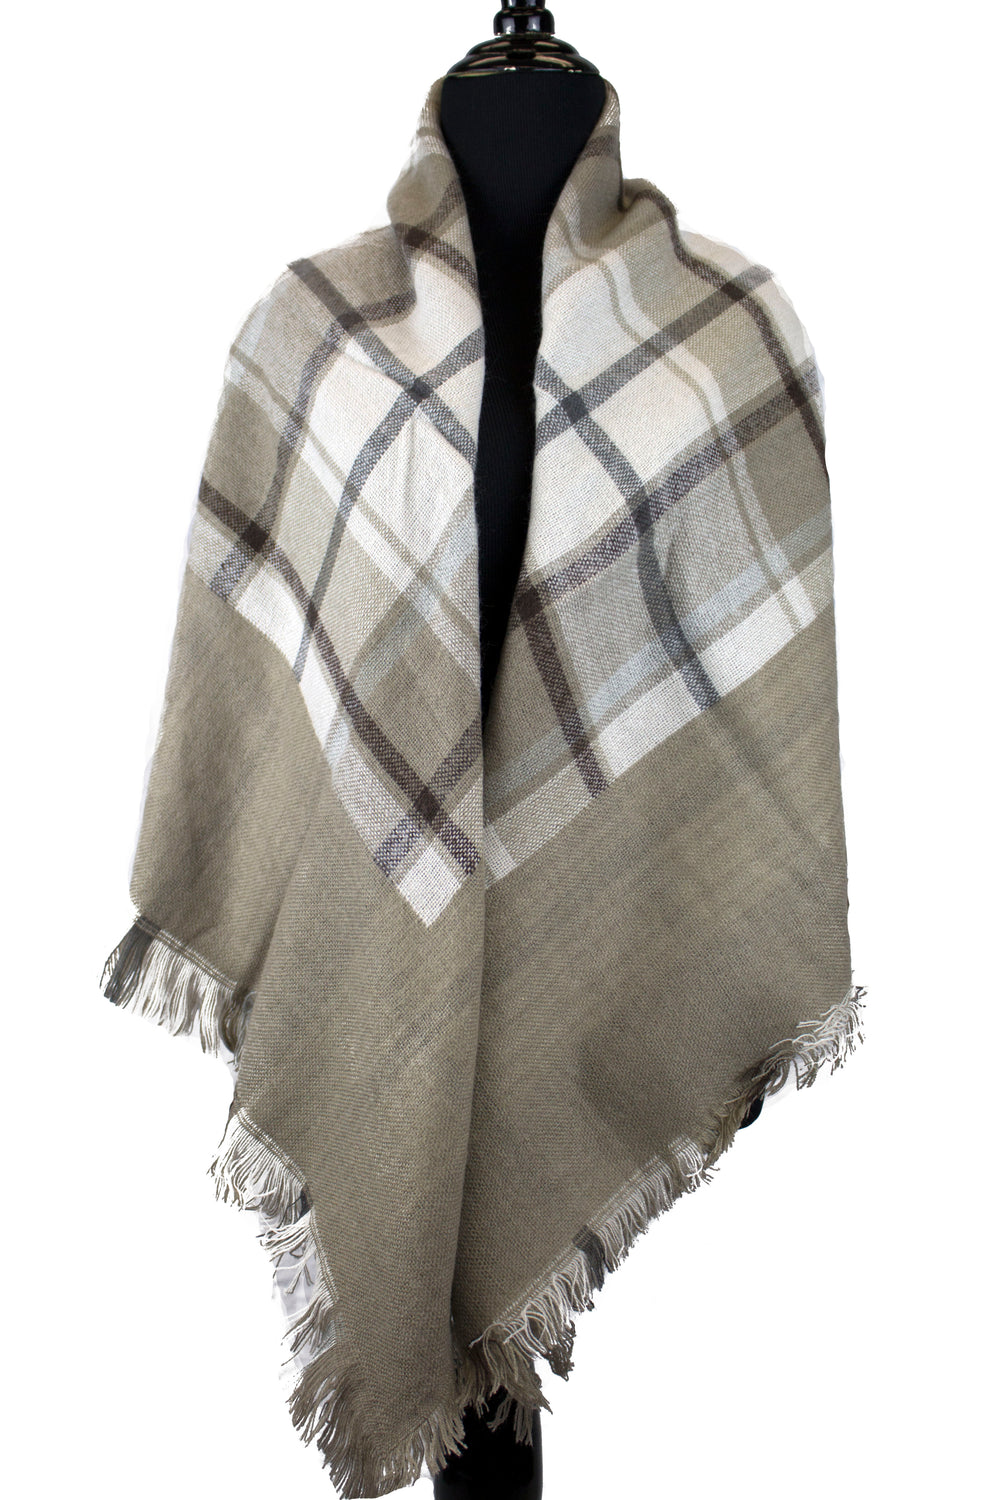 blanket scarf in tan and white with stripes